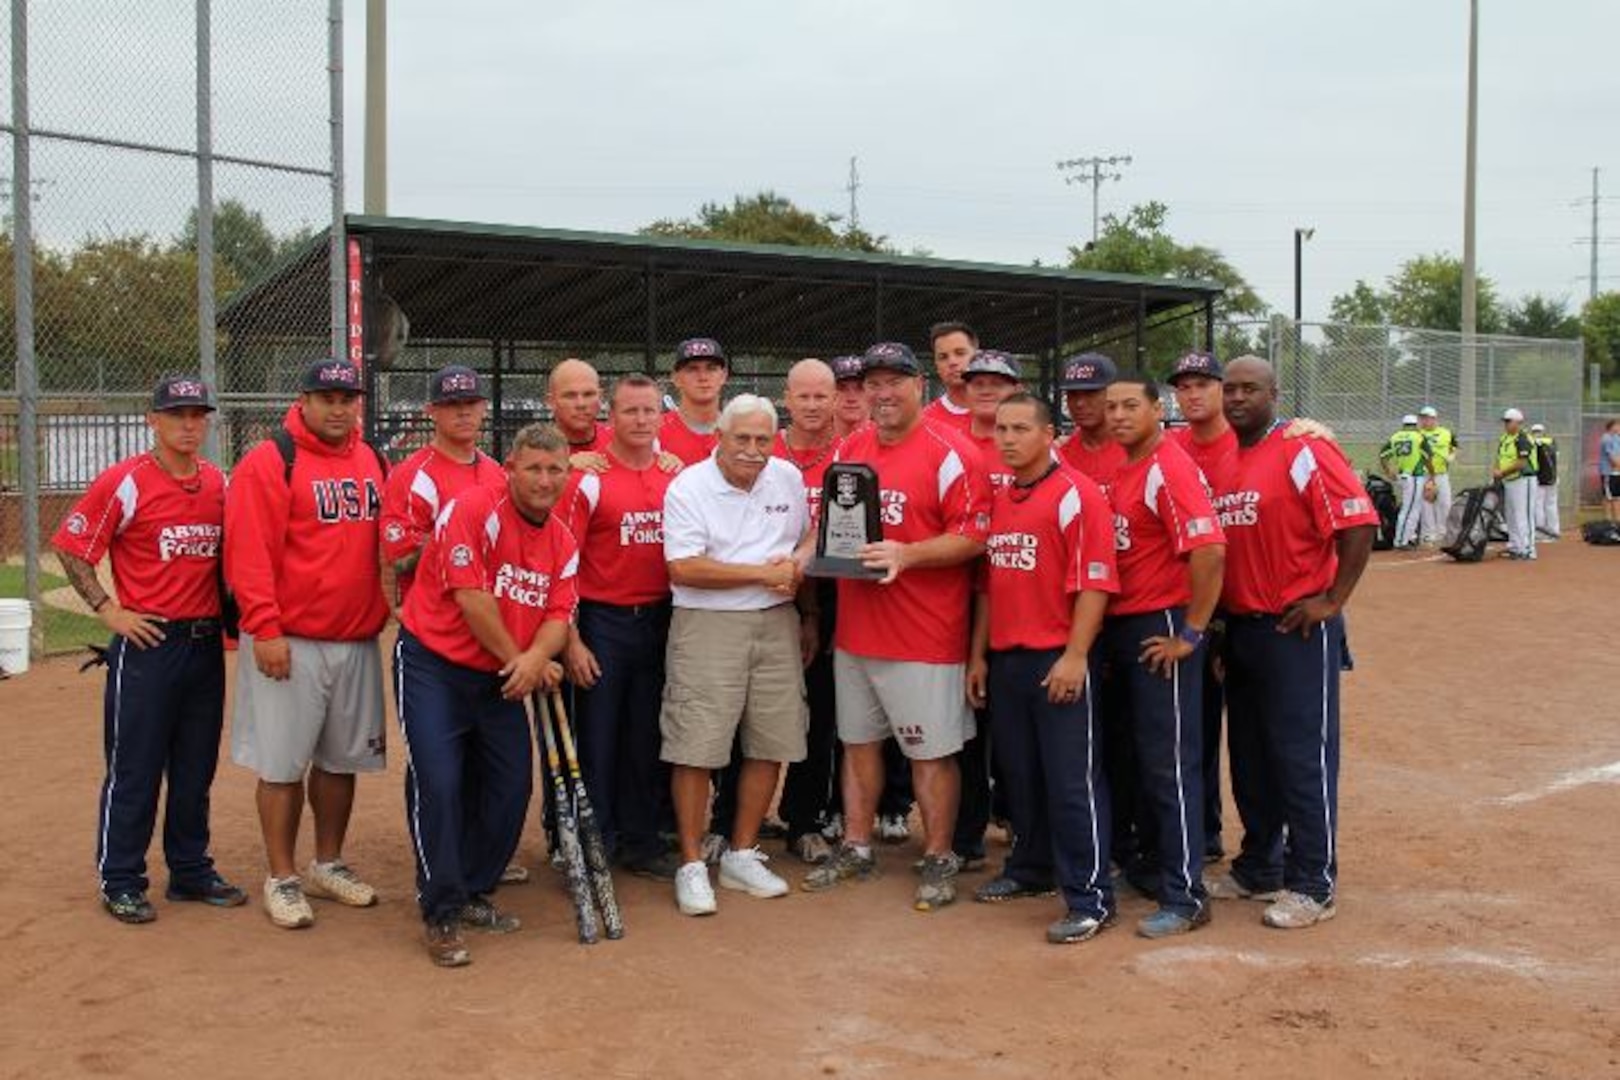 The 2013 Armed Forces Mens Softball Team took bronze at ASA National Softball Championship in Ridgeland, MS 26-30 September.